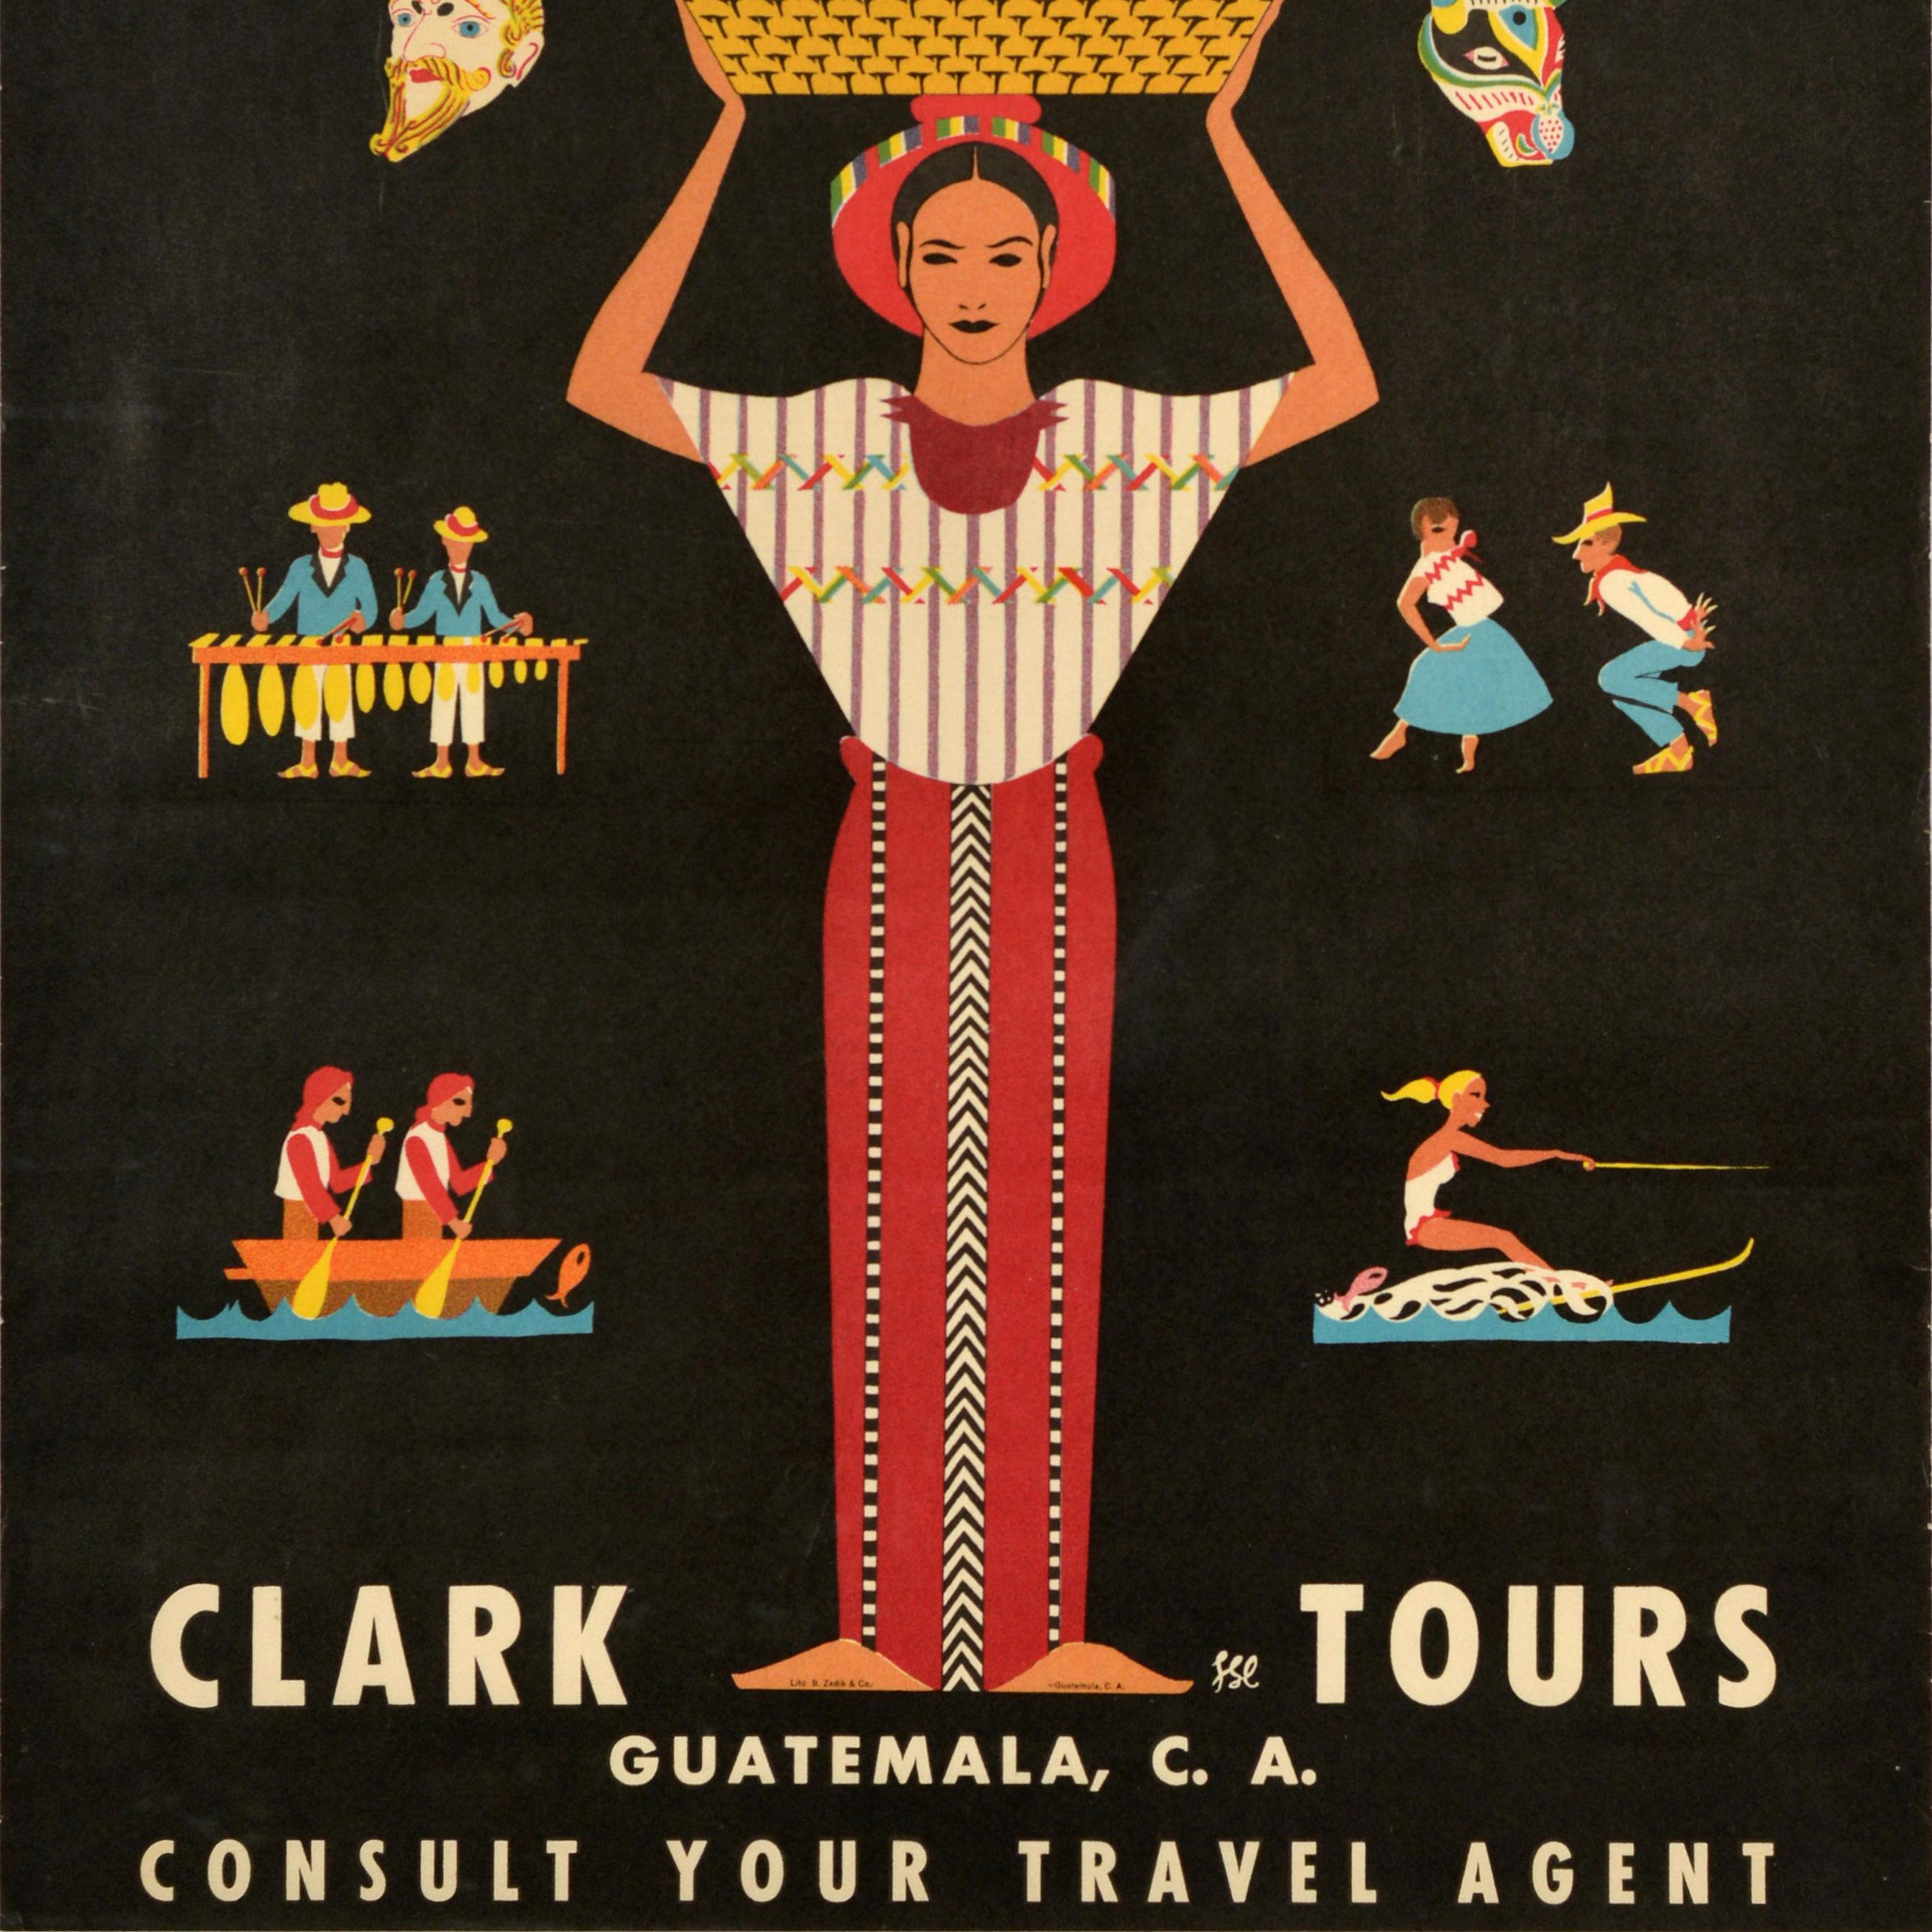 Original vintage travel advertising poster - Guatemala Clark Tours - featuring a colourful illustration of a lady carrying a basket of fruit on her hat surrounded by smaller images depicting people playing music and rowing a boat with a fish jumping